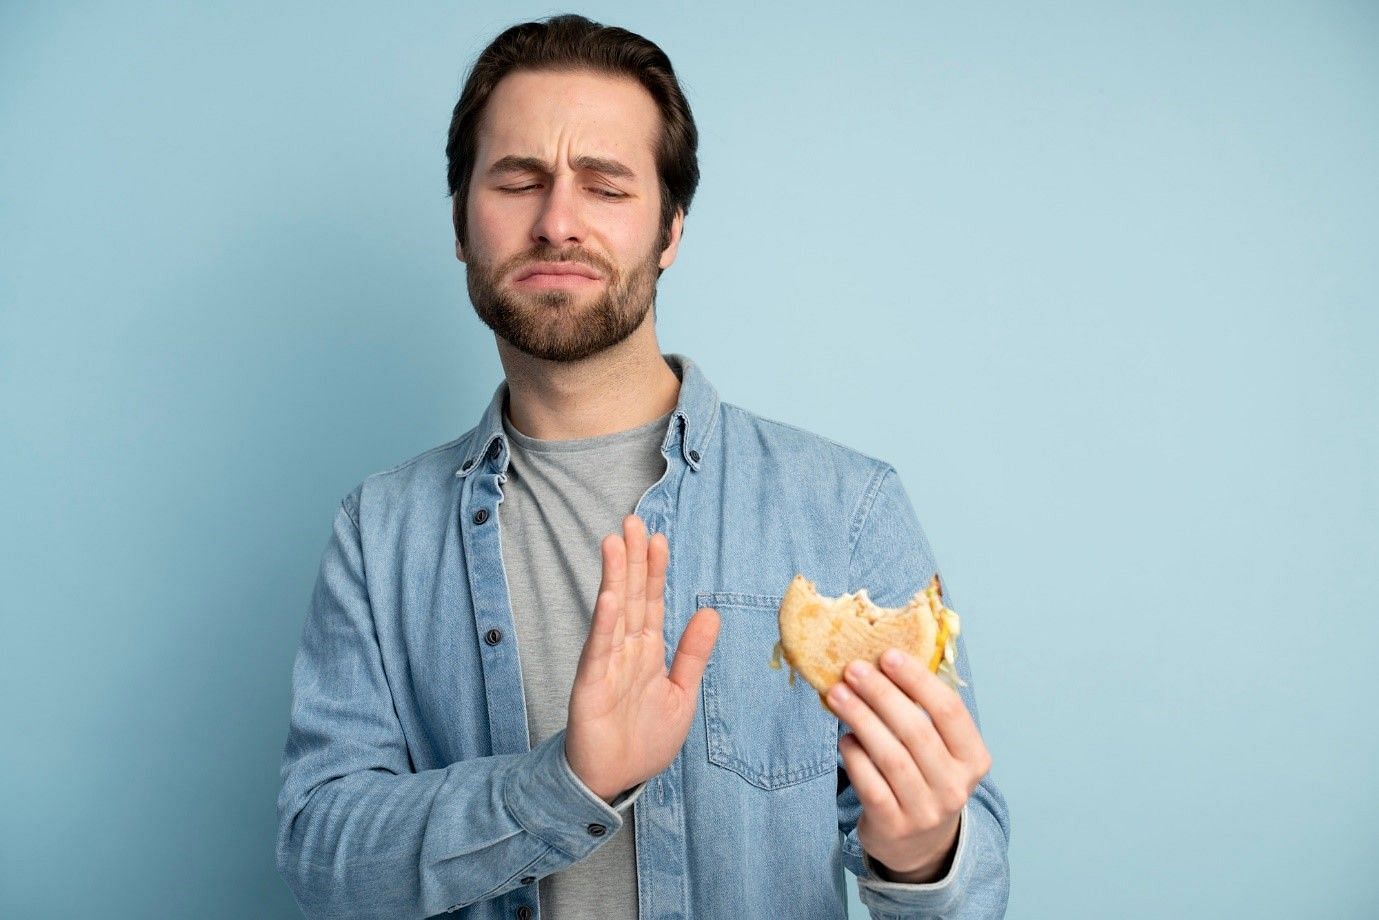 Constipation makes you lose your appetite (Image by Freepik on Freepik)